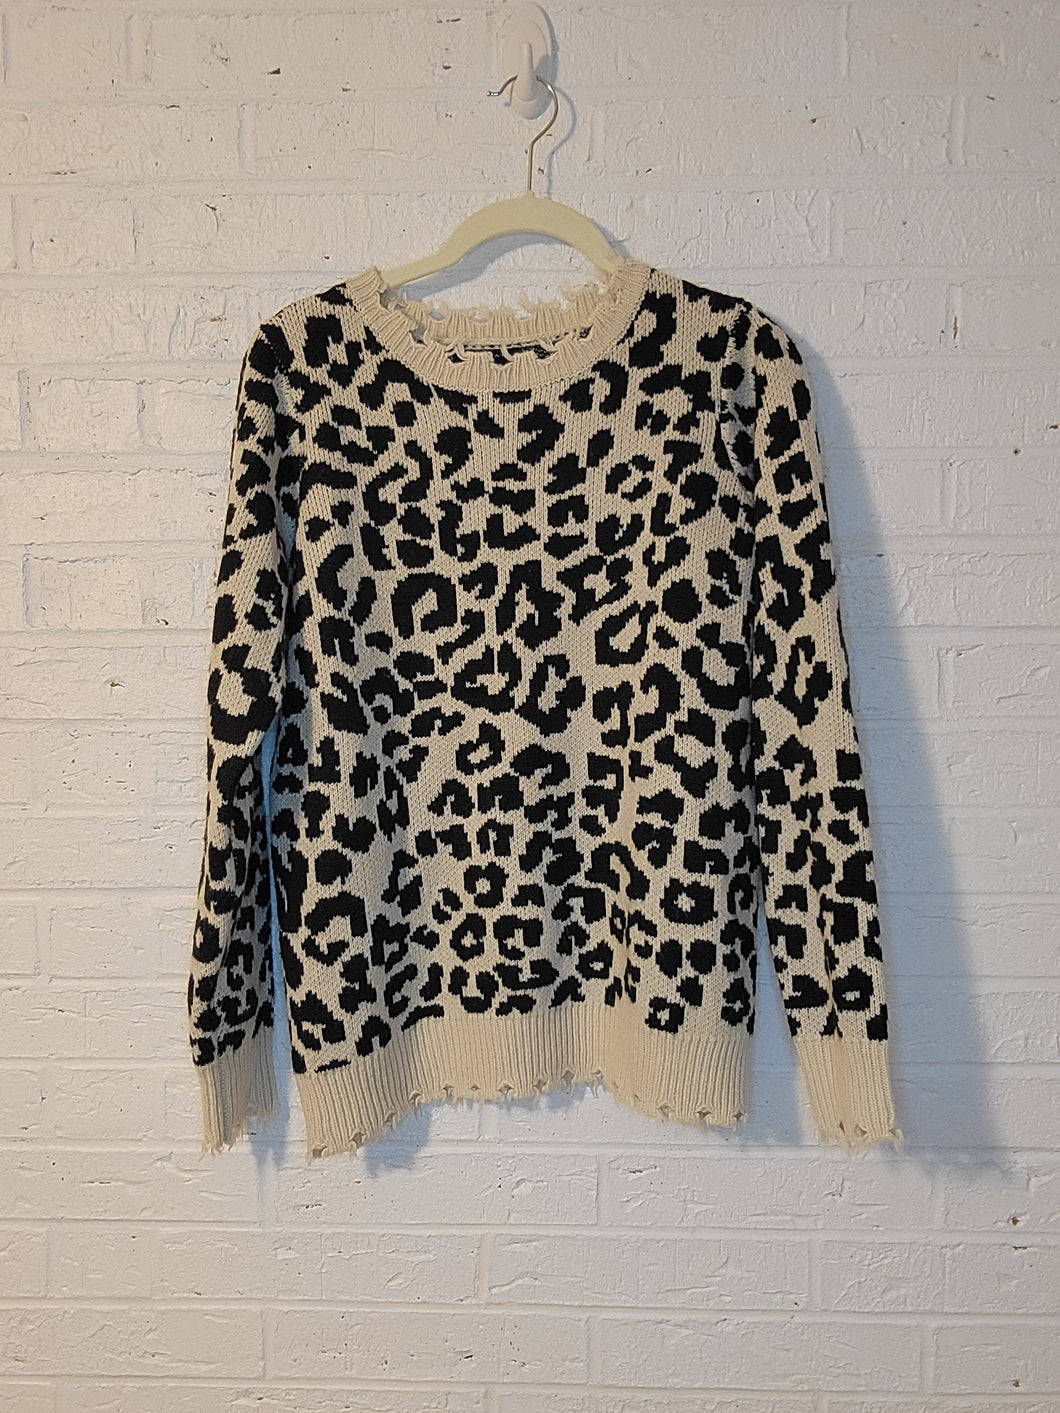 S - destroyed leopard print sweater